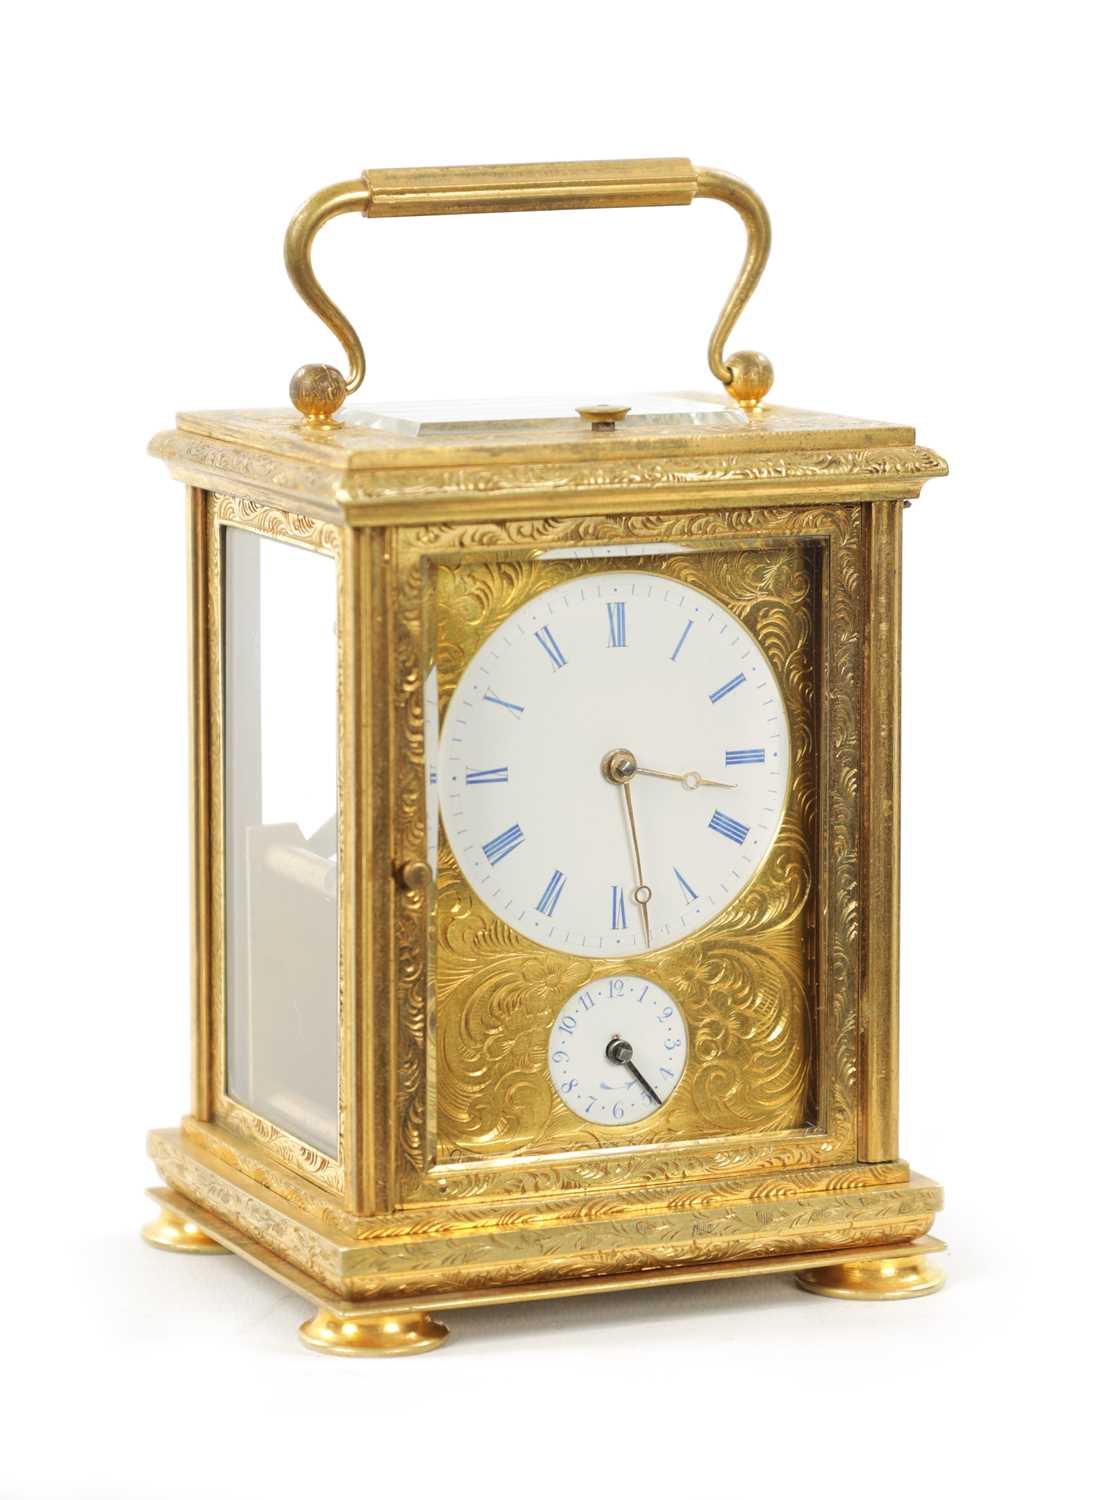 LE ROY ET FILS, PALAIS ROYAL. AN UNUSUAL LATE 19TH CENTURY FRENCH CARRIAGE CLOCK